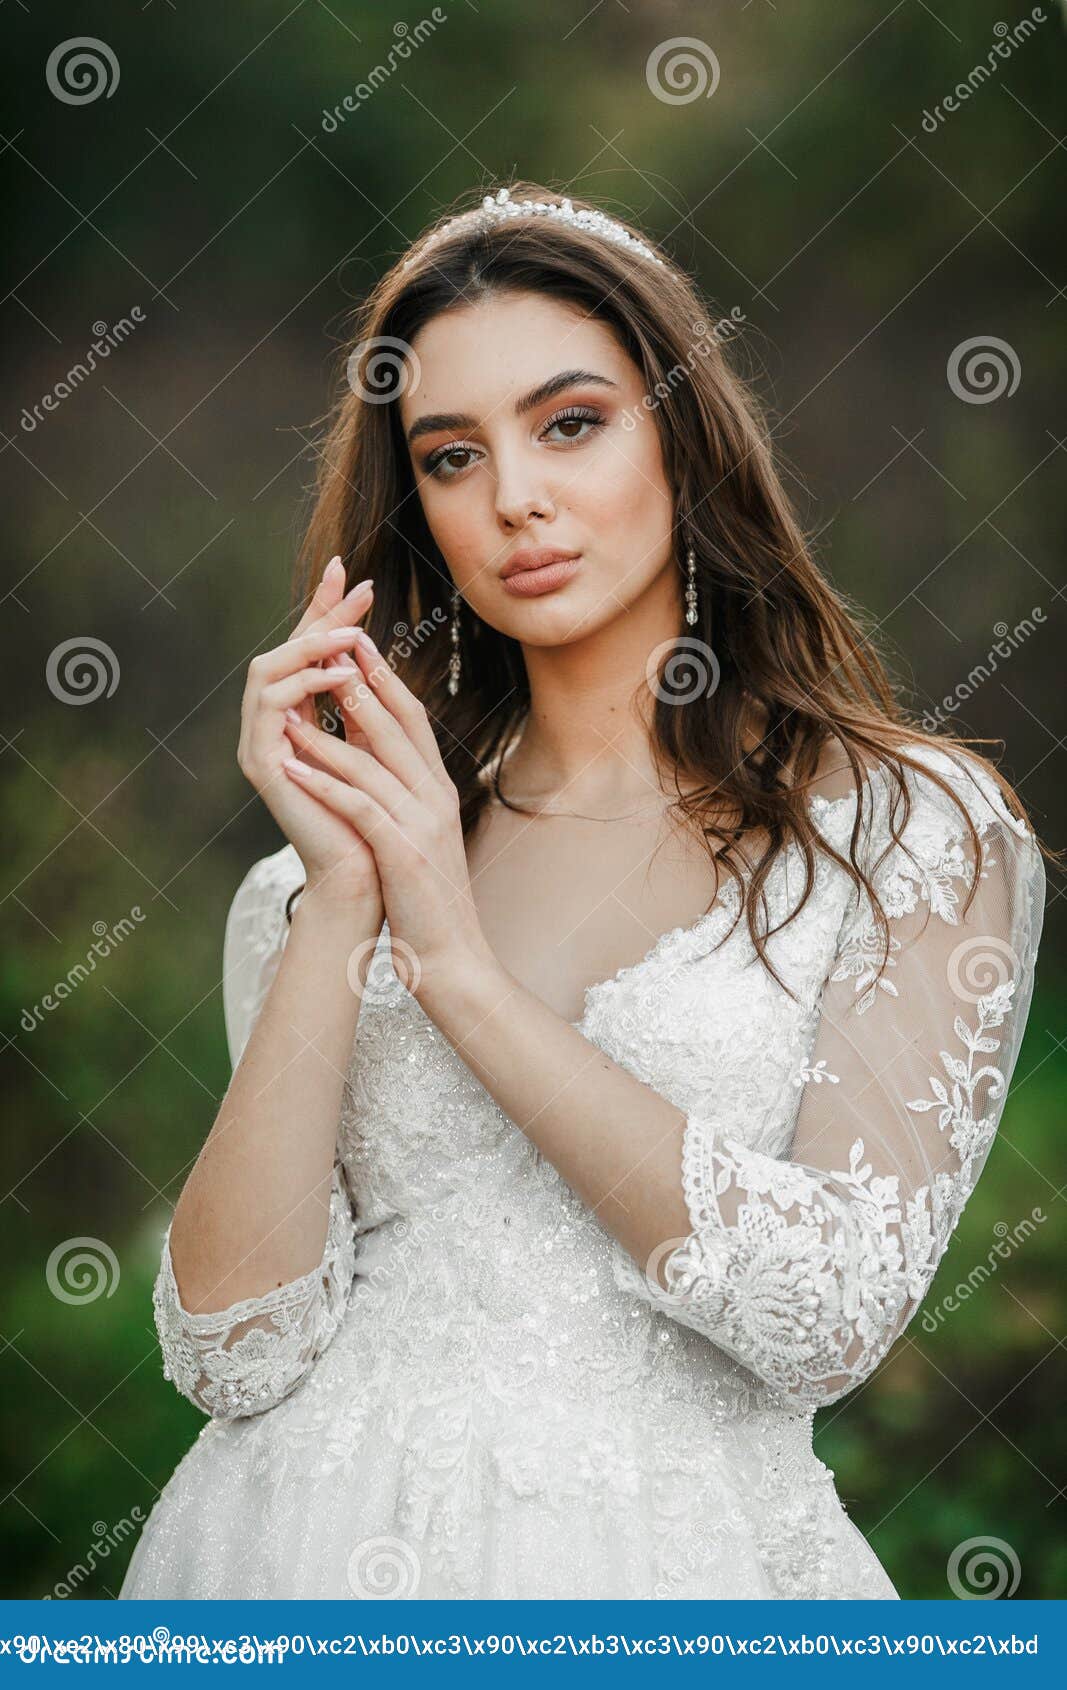 A Young Cute Girl in a White Dress Poses Beautifully. Positive